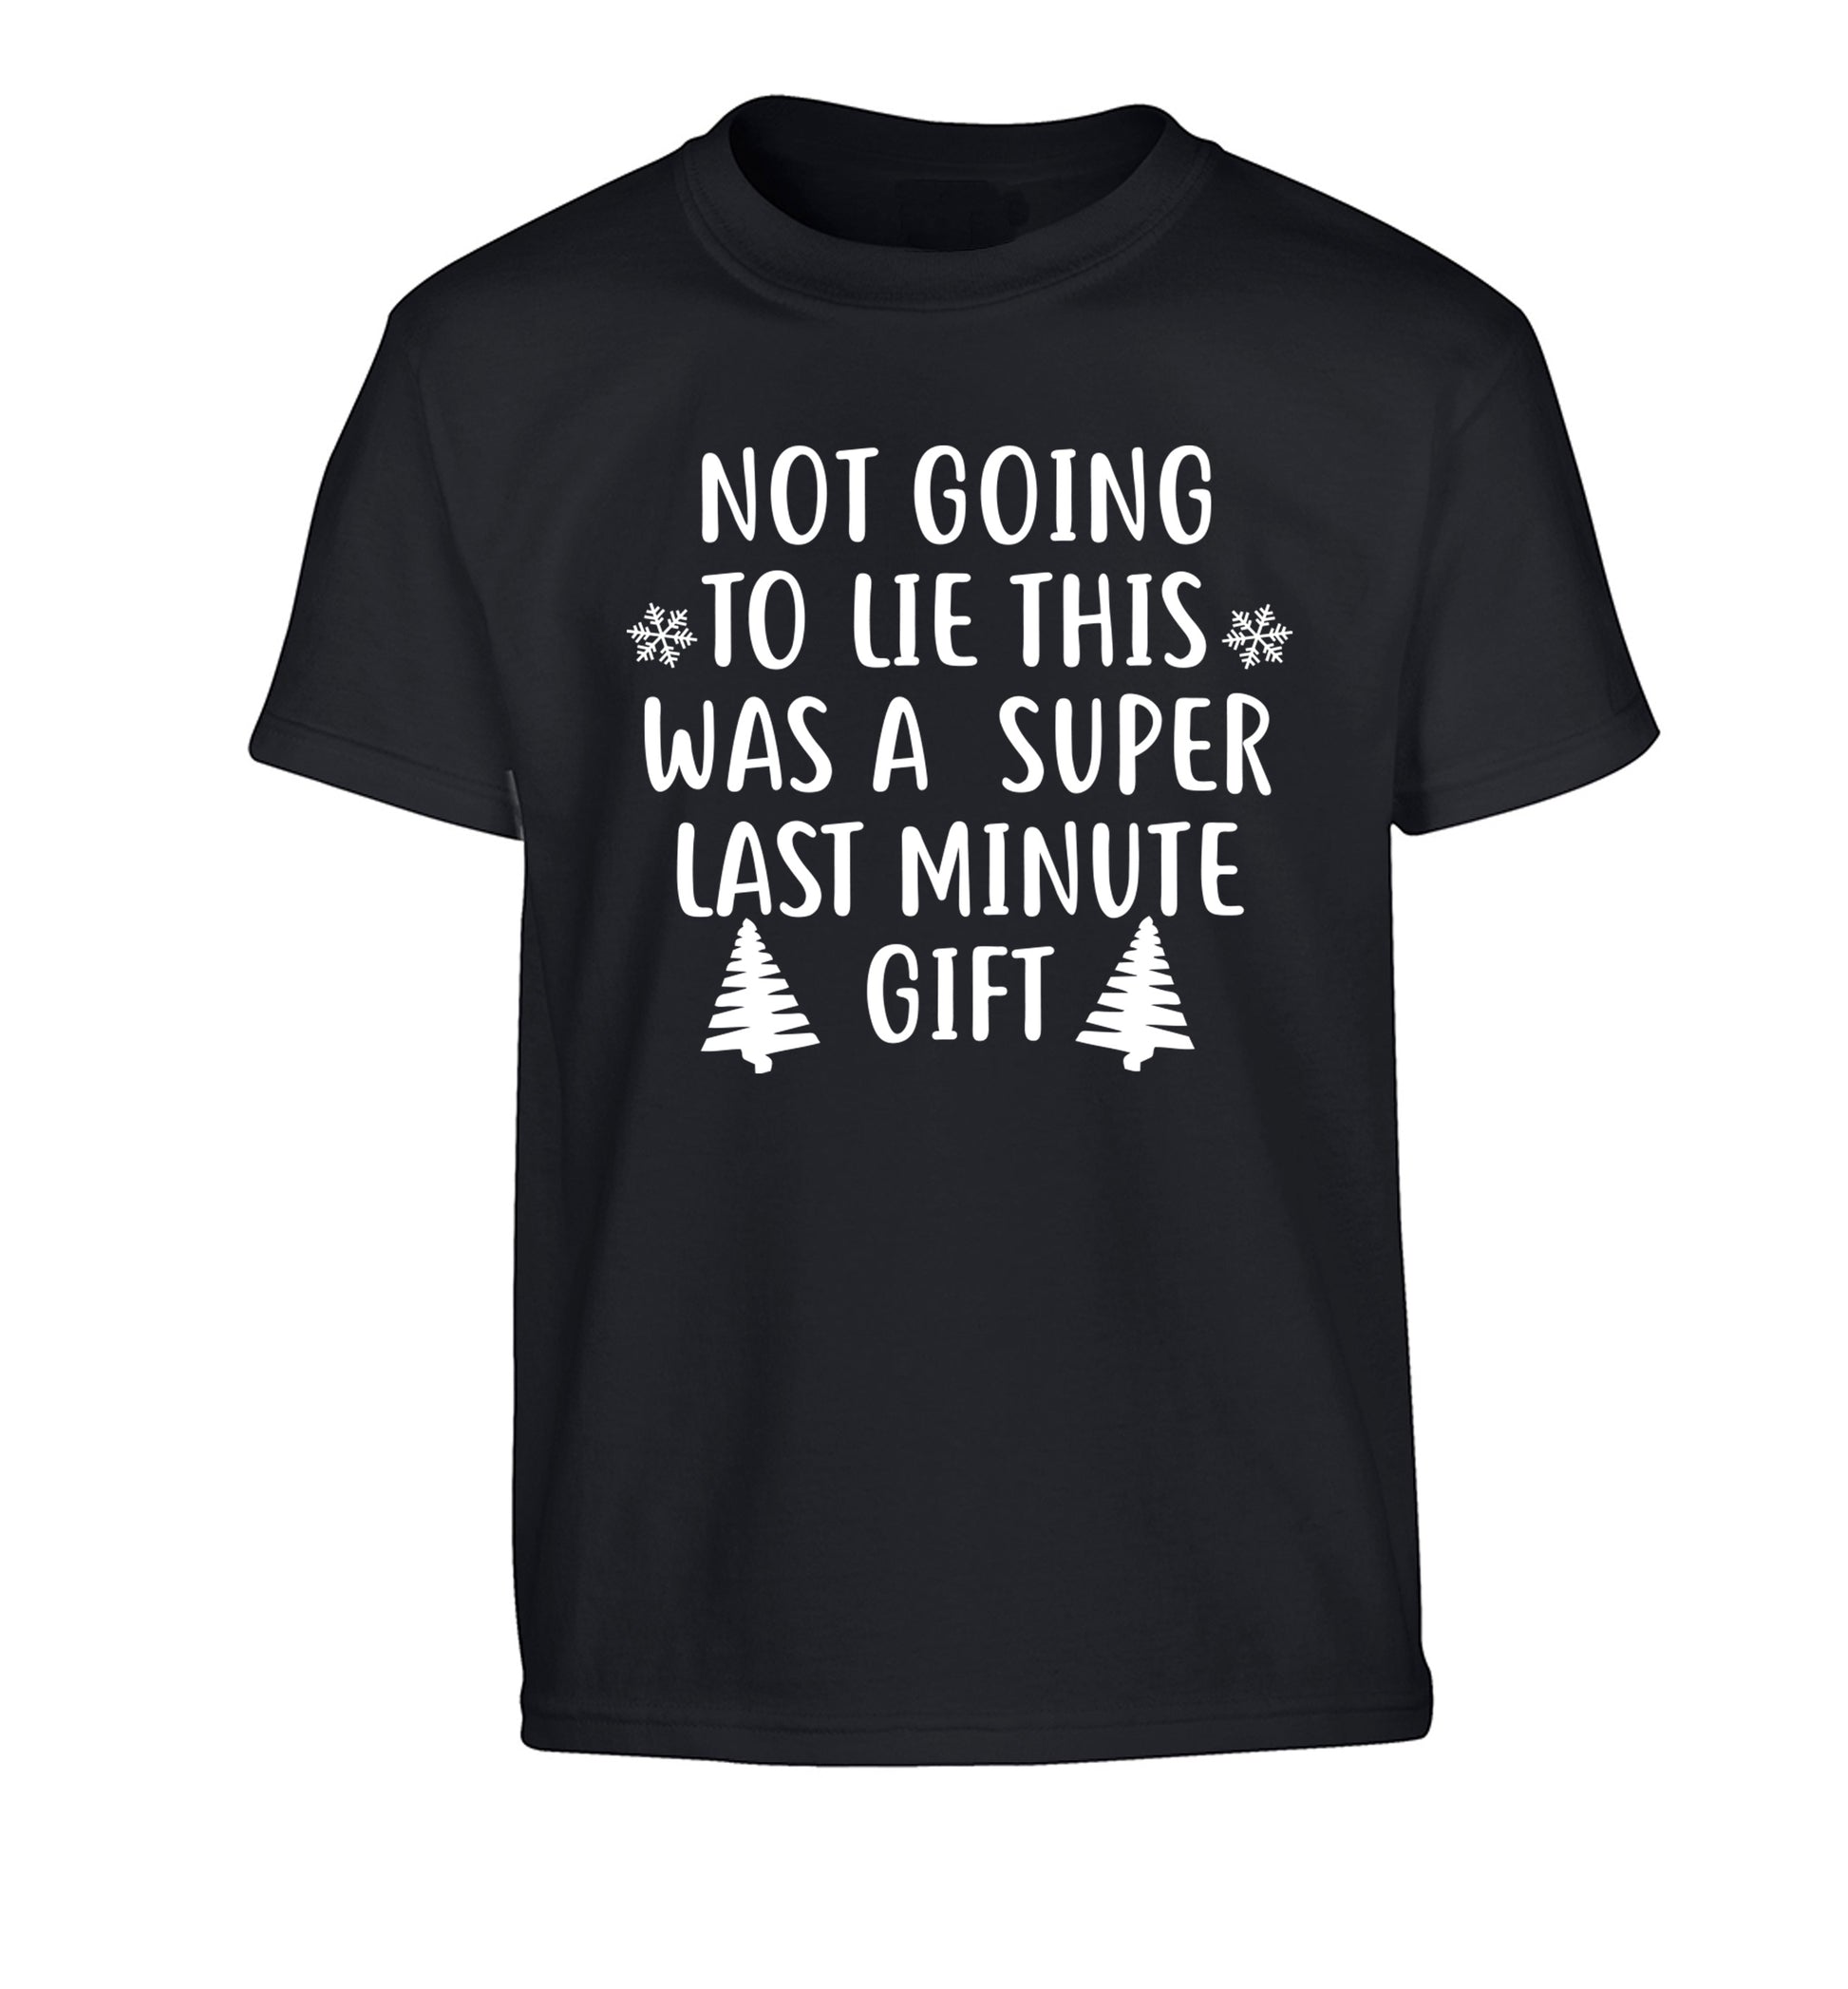 Not going to lie this was a super last minute gift Children's black Tshirt 12-13 Years